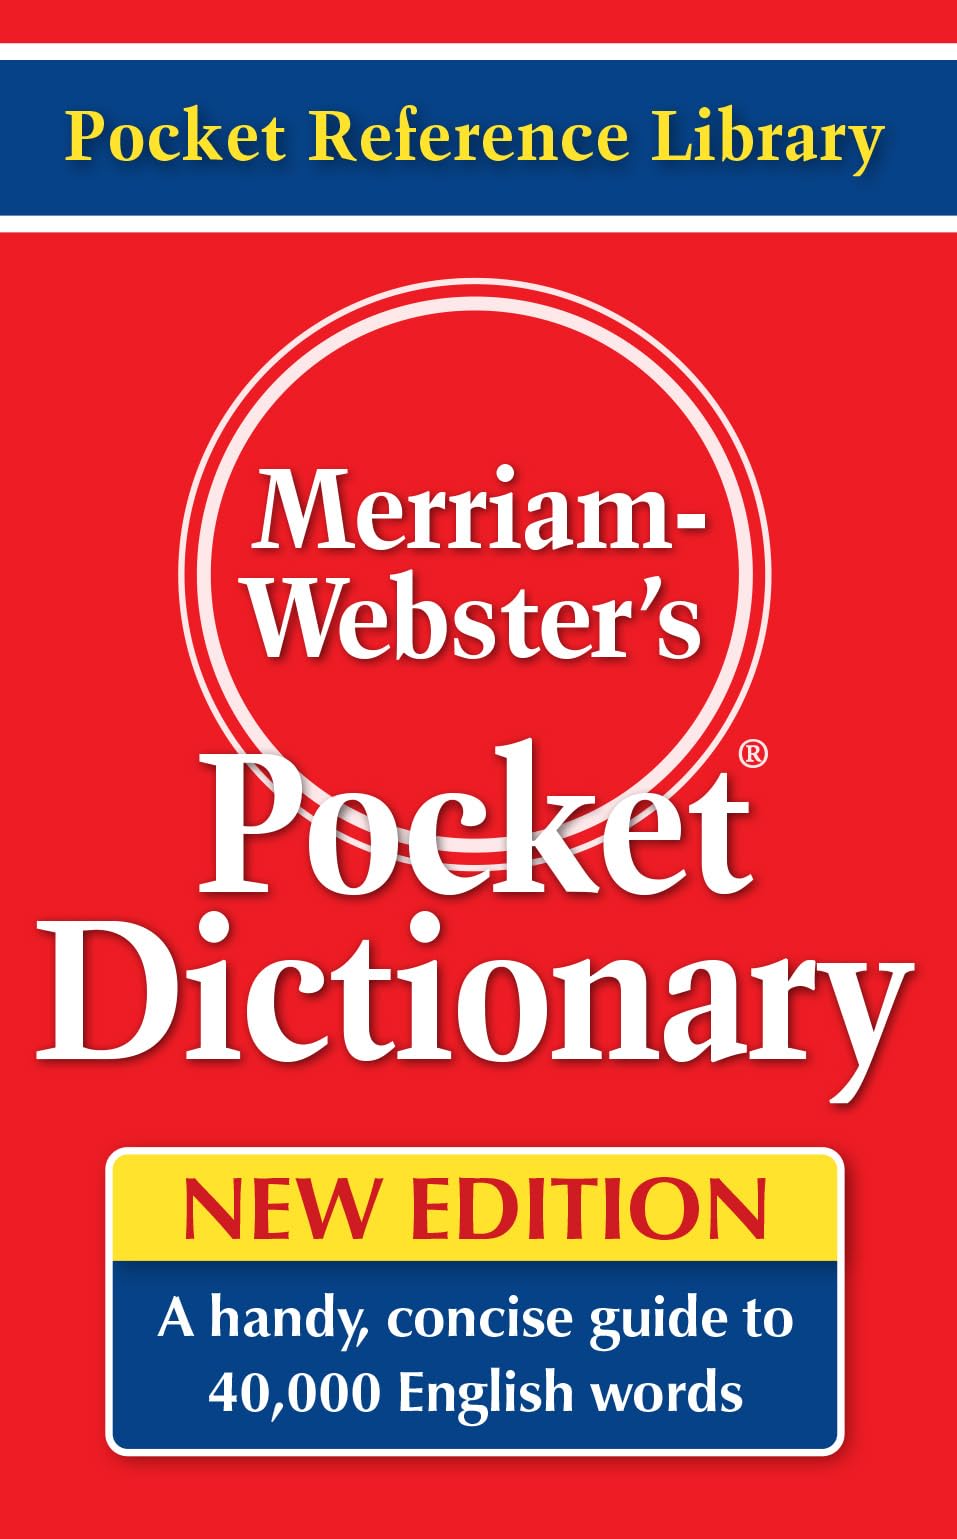 Merriam-Webster's Pocket Dictionary by Merriam-Webster Inc